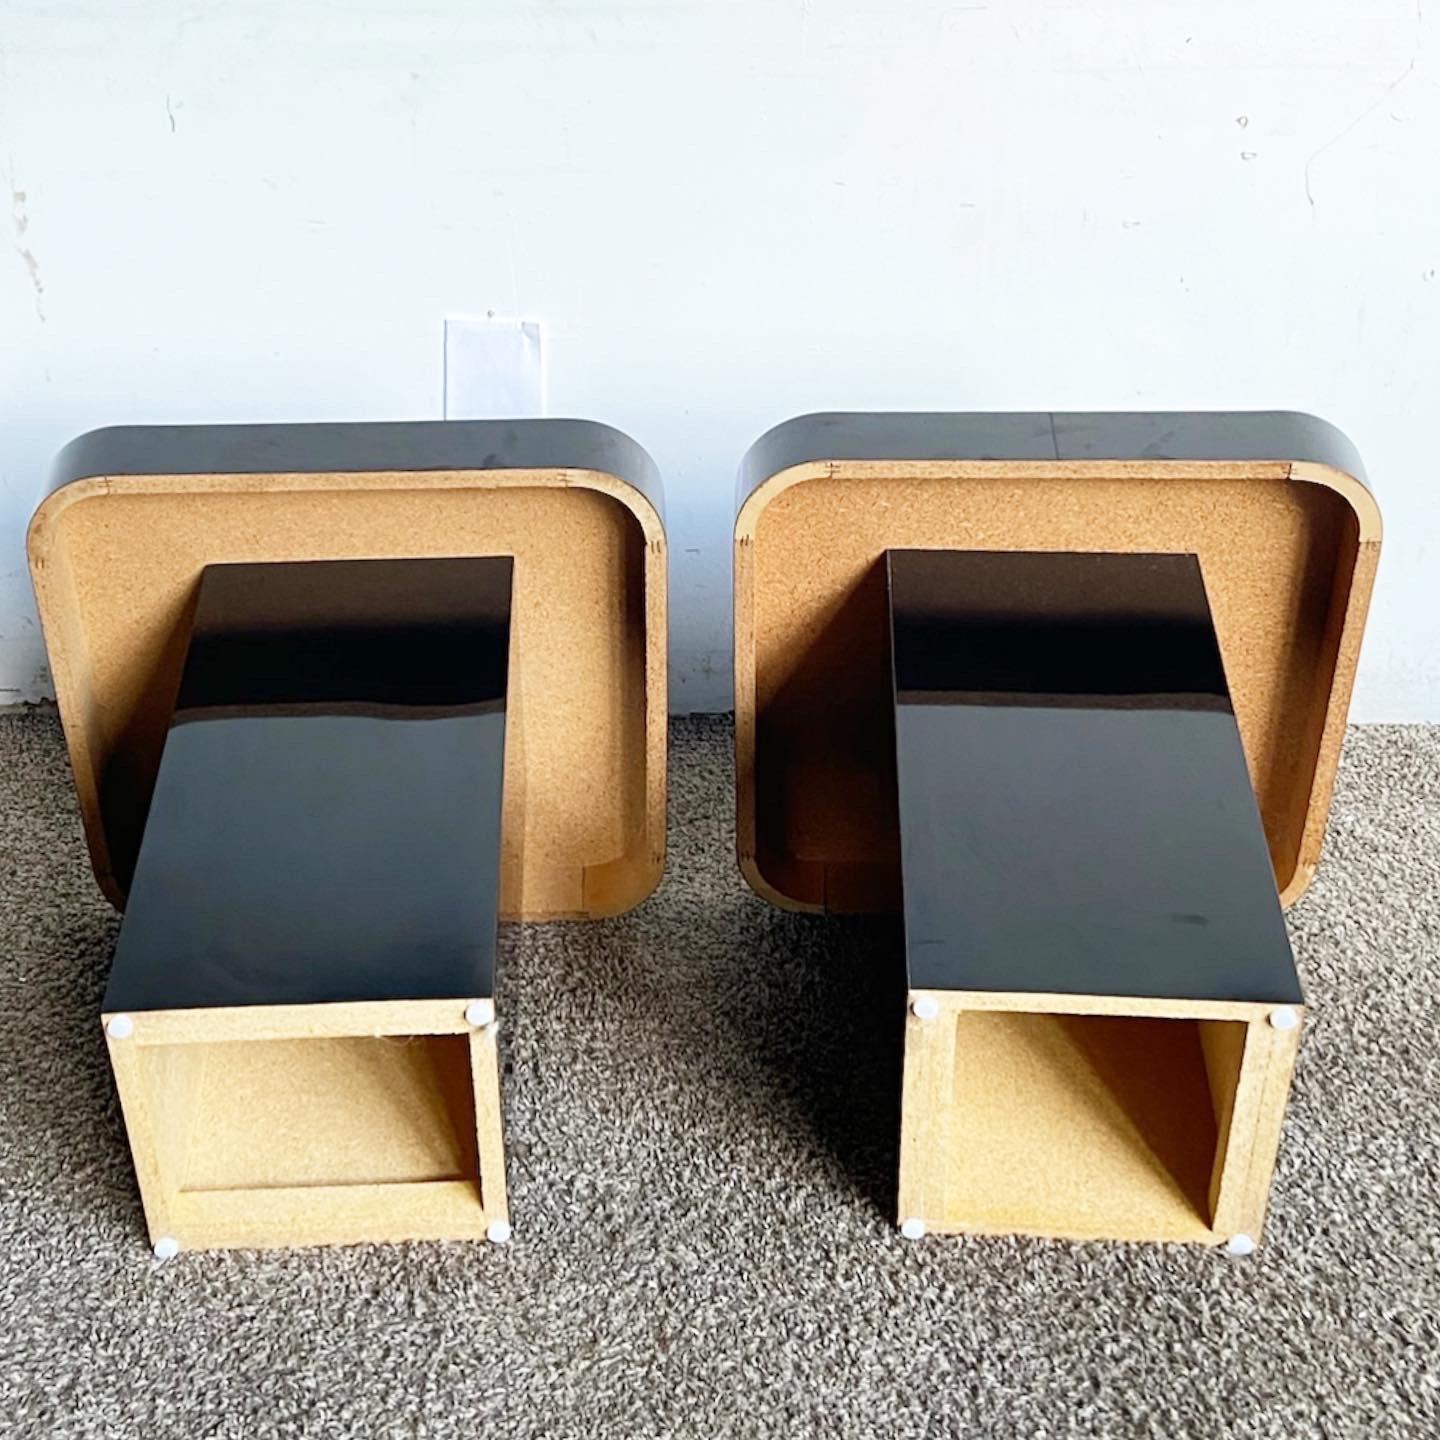 Post-Modern Postmodern Black Lacquer Laminate Mushroom Side Tables - a Pair For Sale